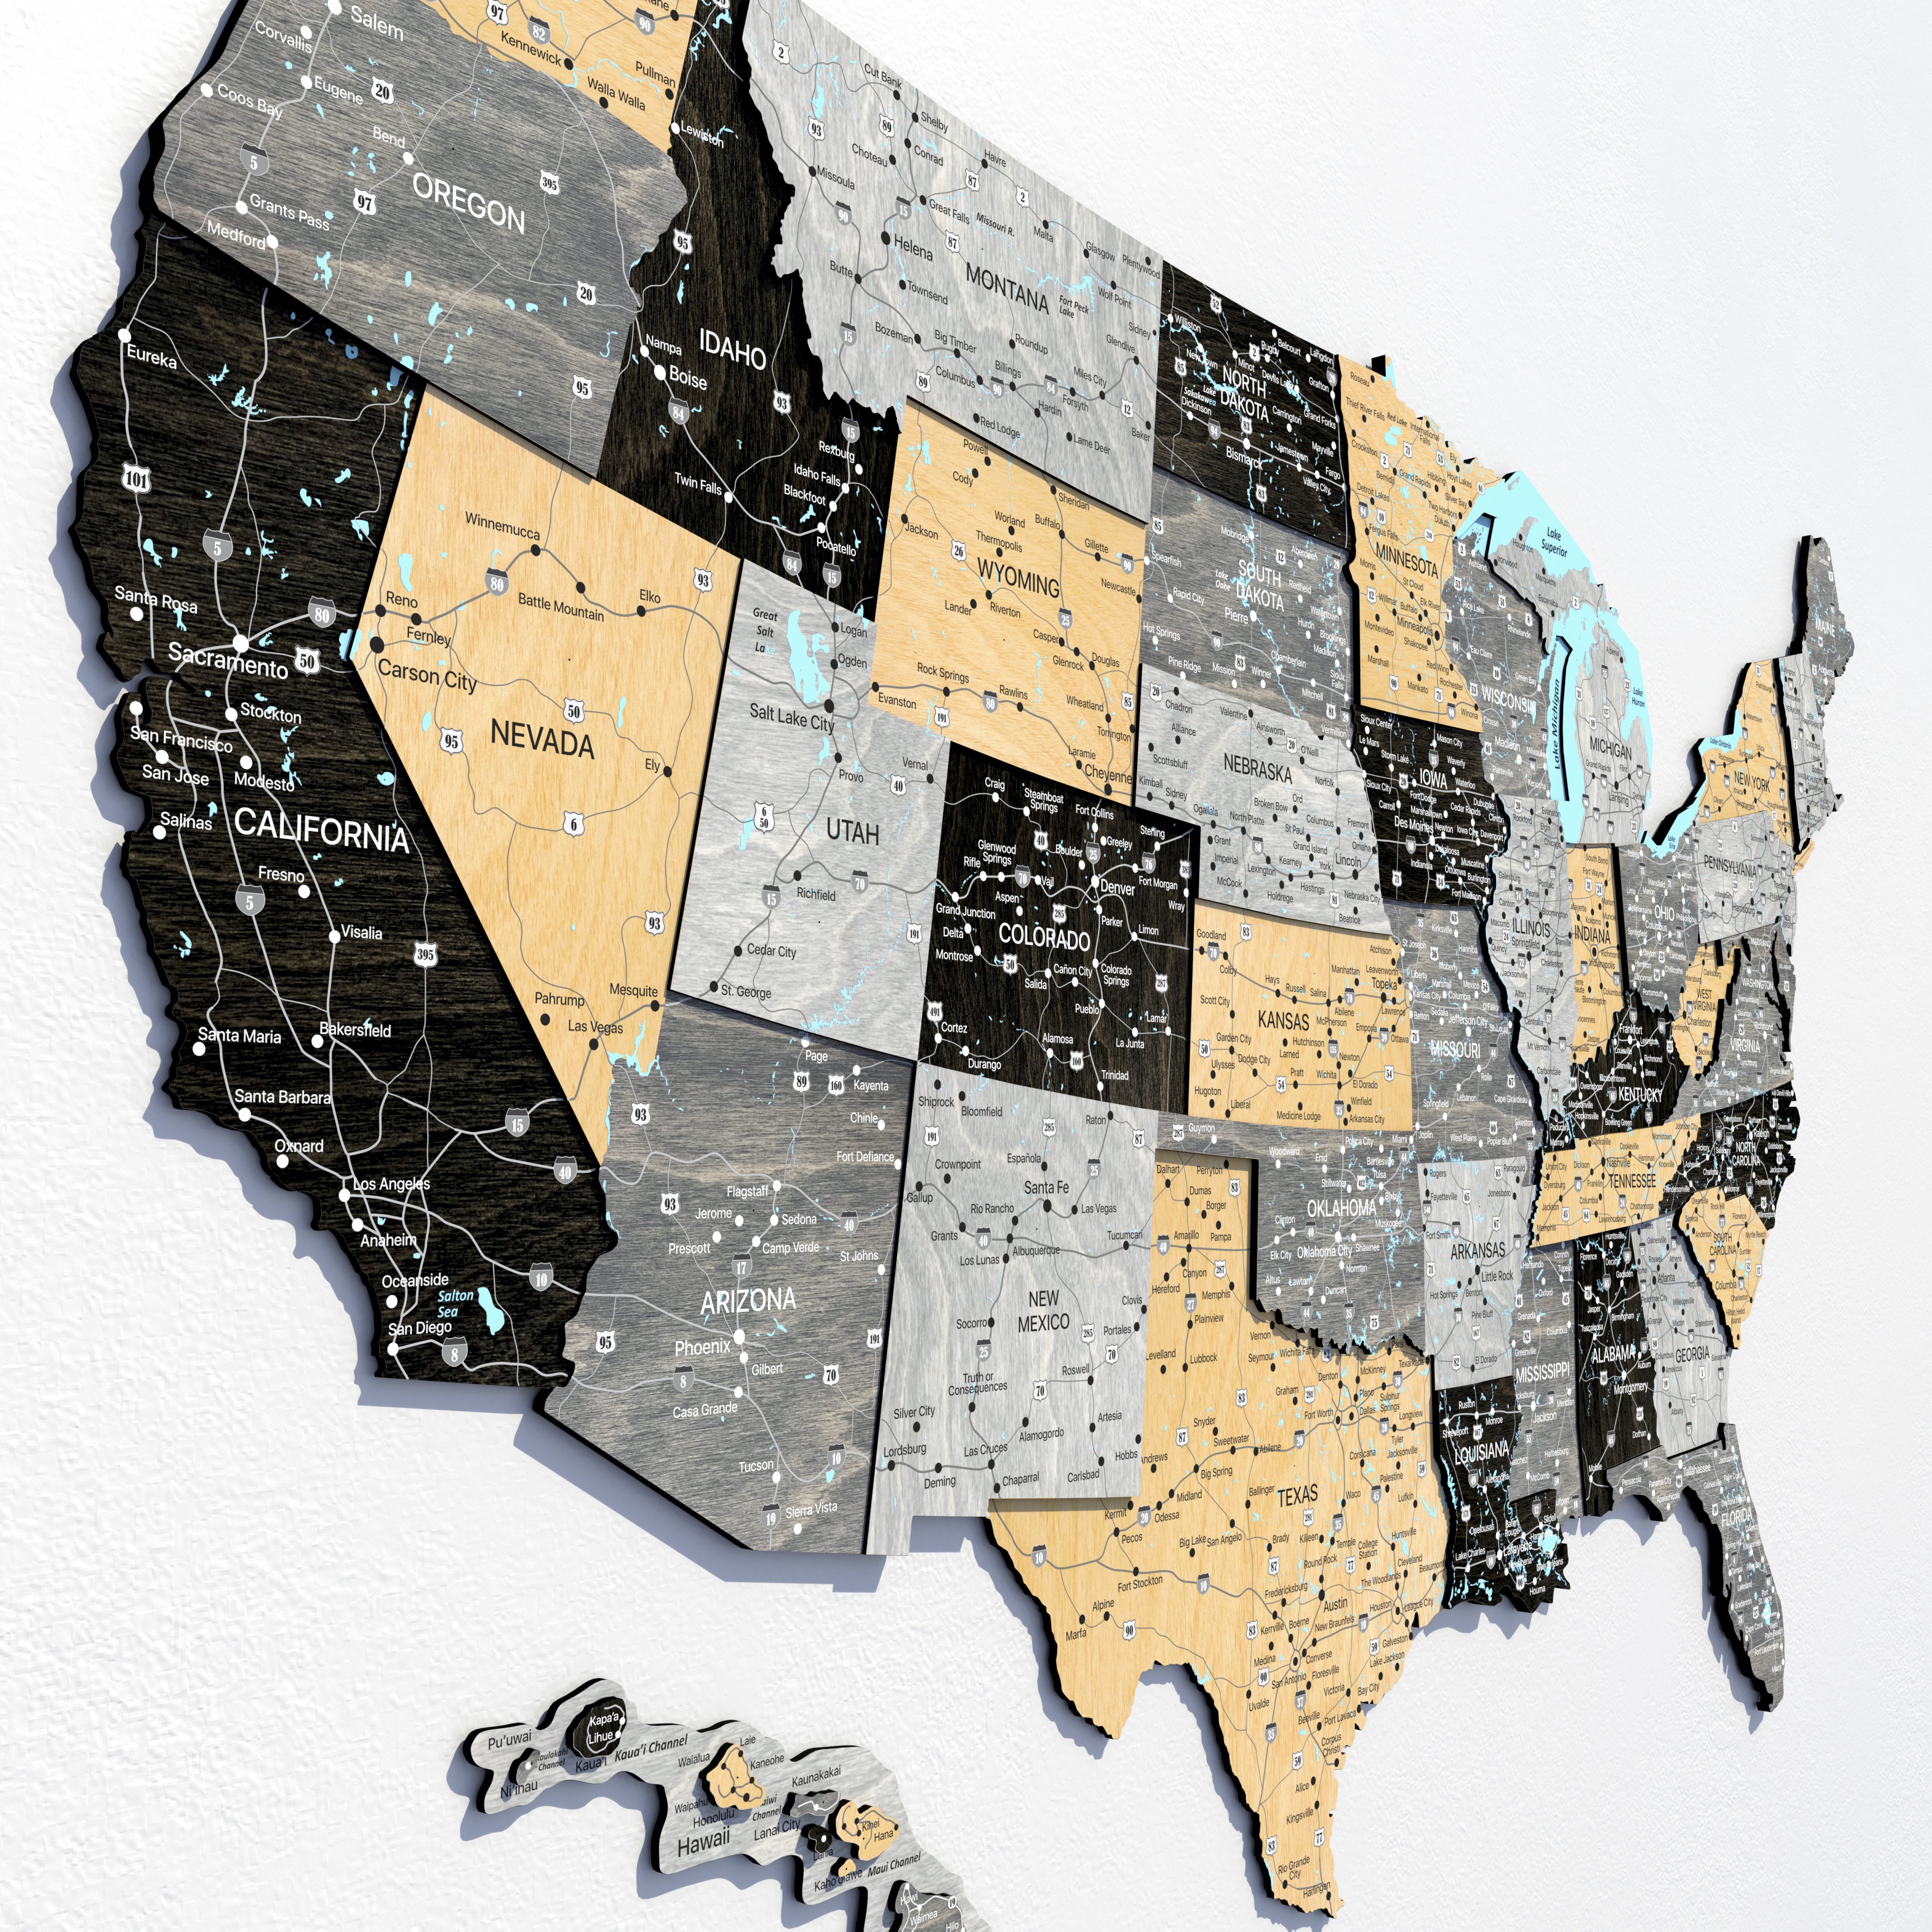 a map of the united states is shown on a wall